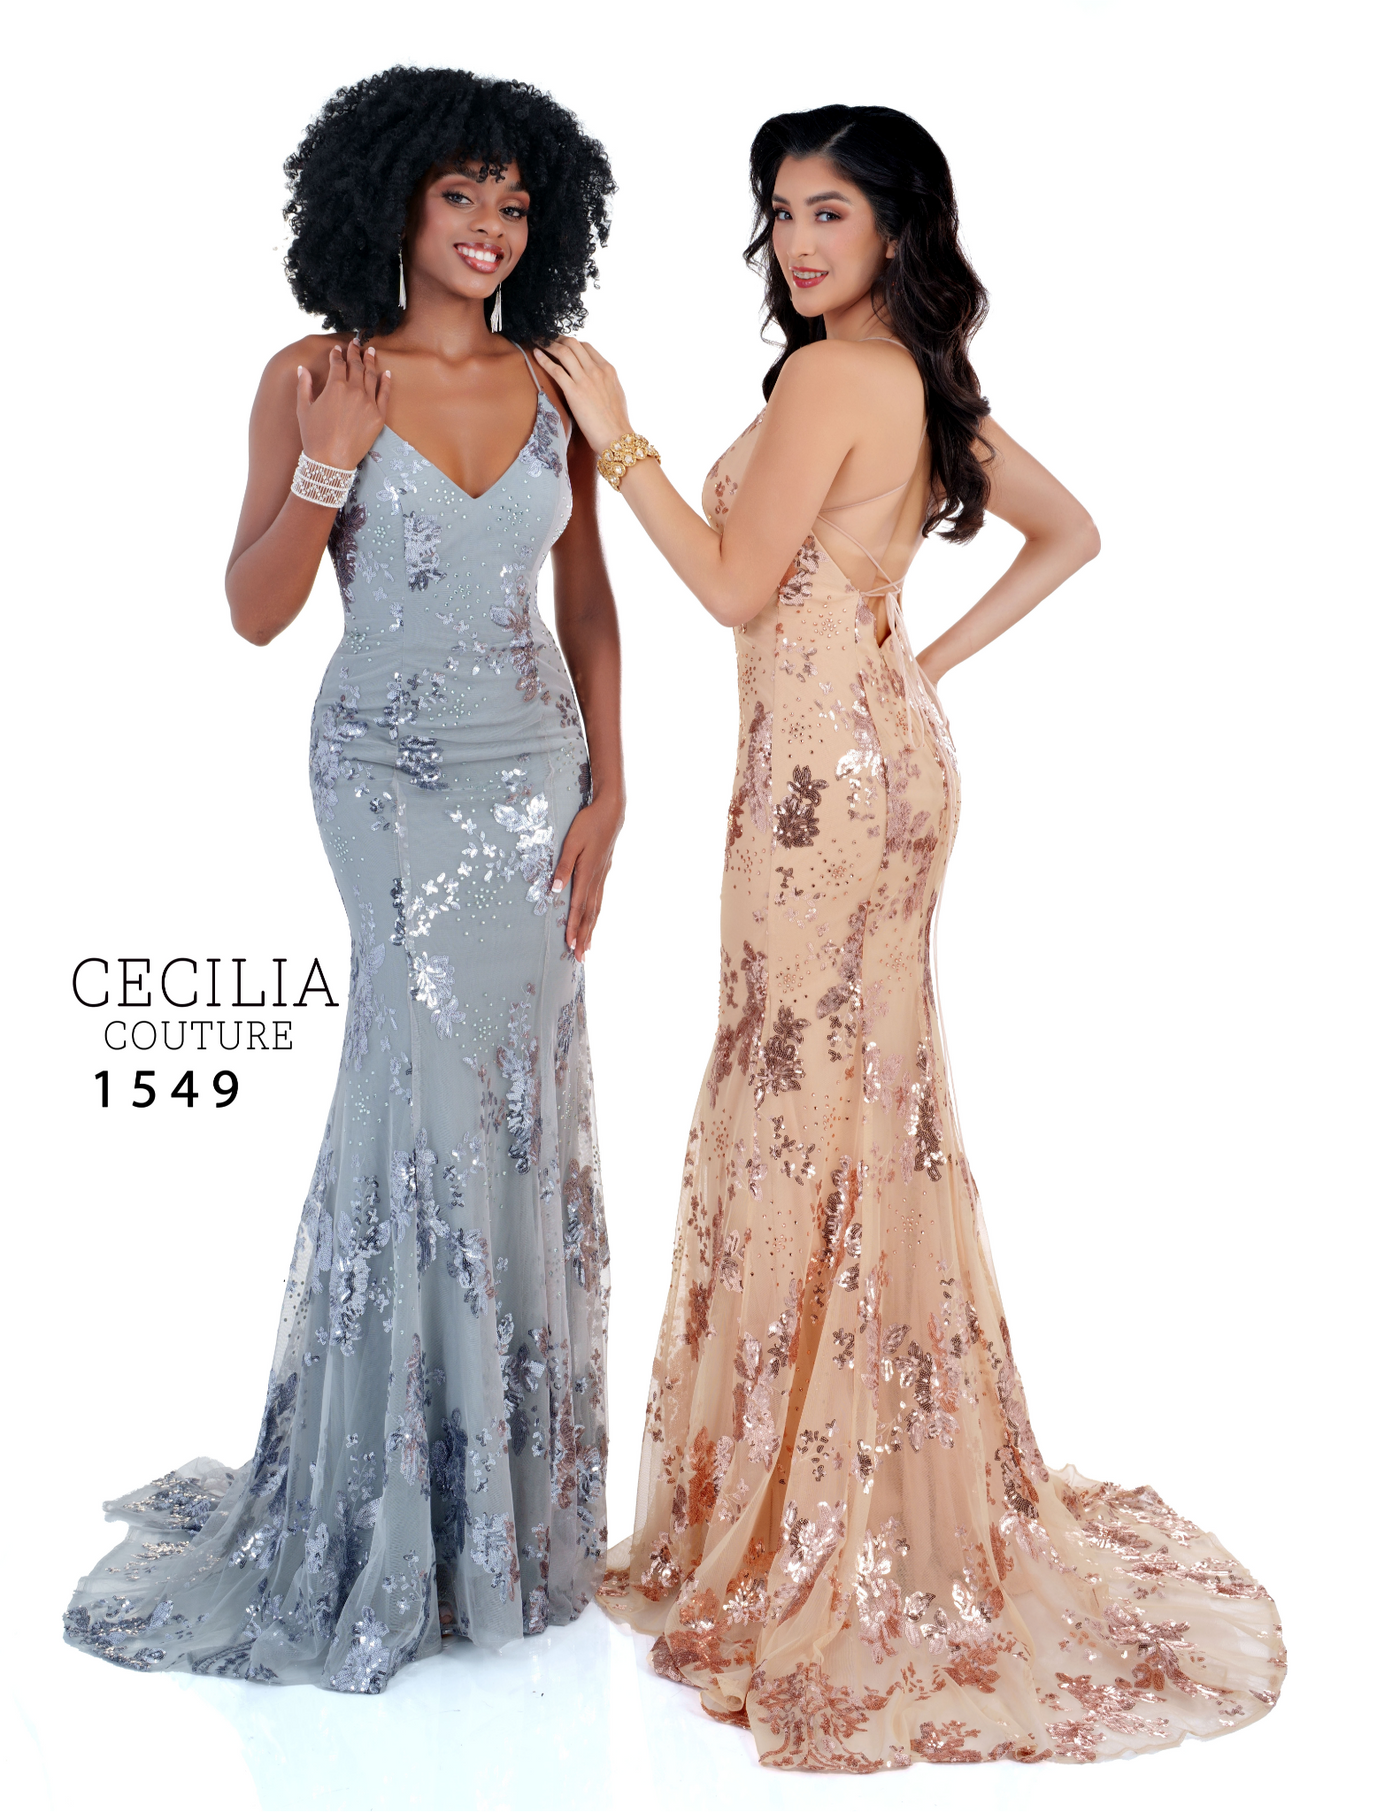 CELCILIA COUTURE 1549 ROSE GOLD PROM DRESS